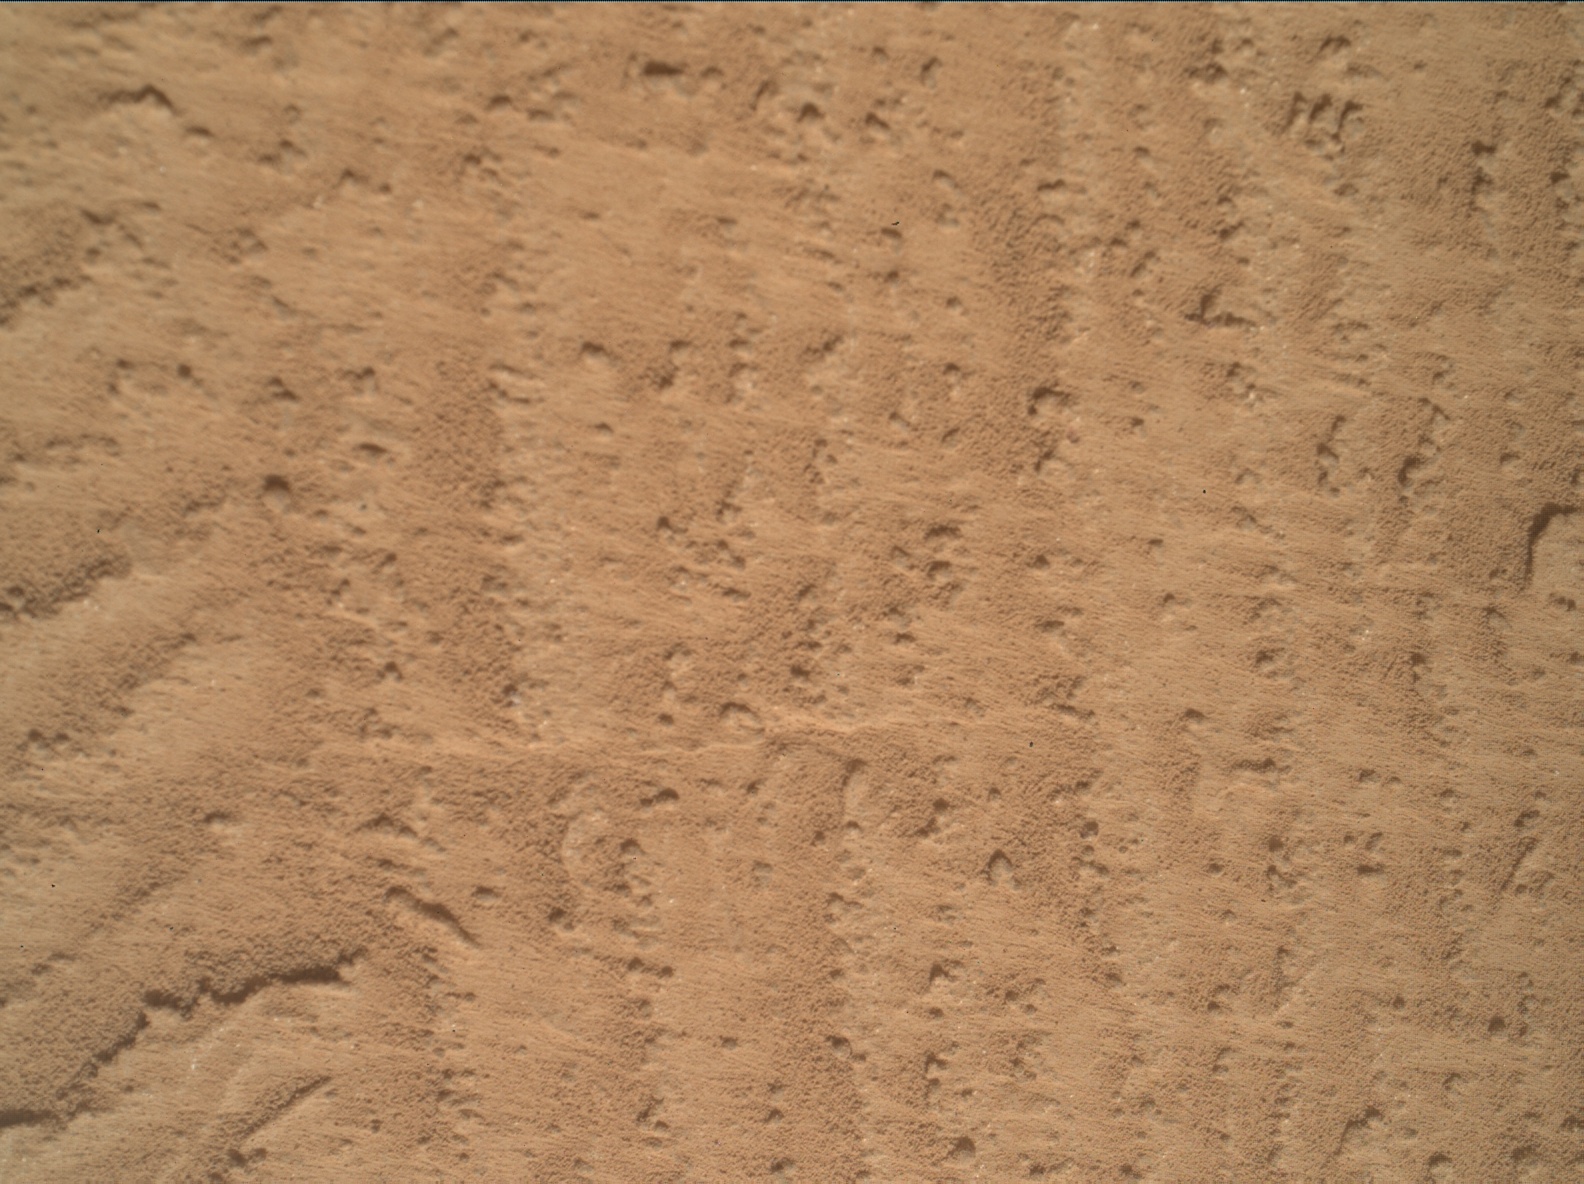 Nasa's Mars rover Curiosity acquired this image using its Mars Hand Lens Imager (MAHLI) on Sol 3478